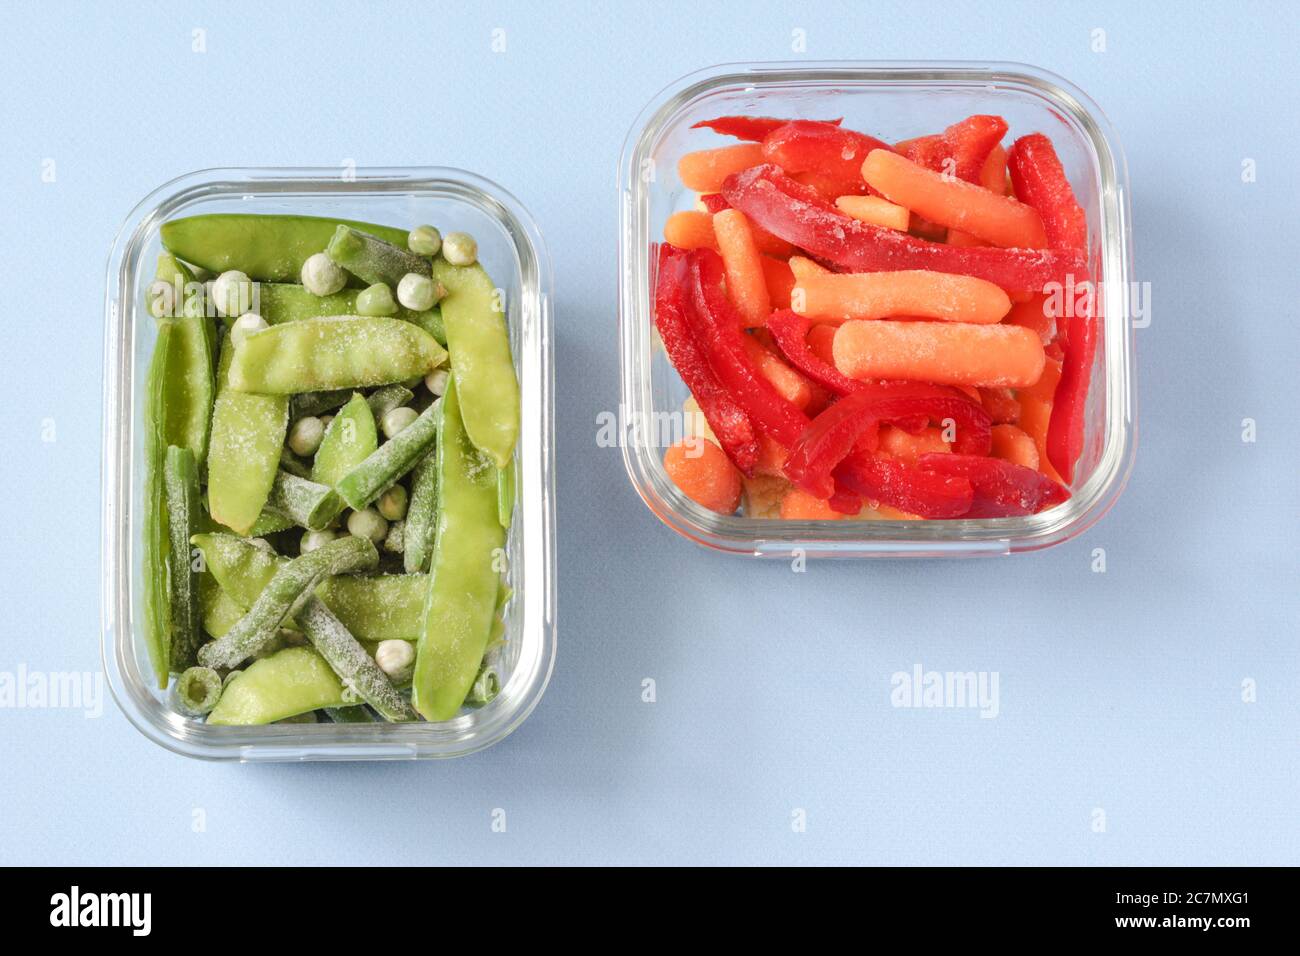 Frozen vegetables such as green peas, pea pods, green beans, red sweet pepper and baby carrot in the transparent bowls Stock Photo